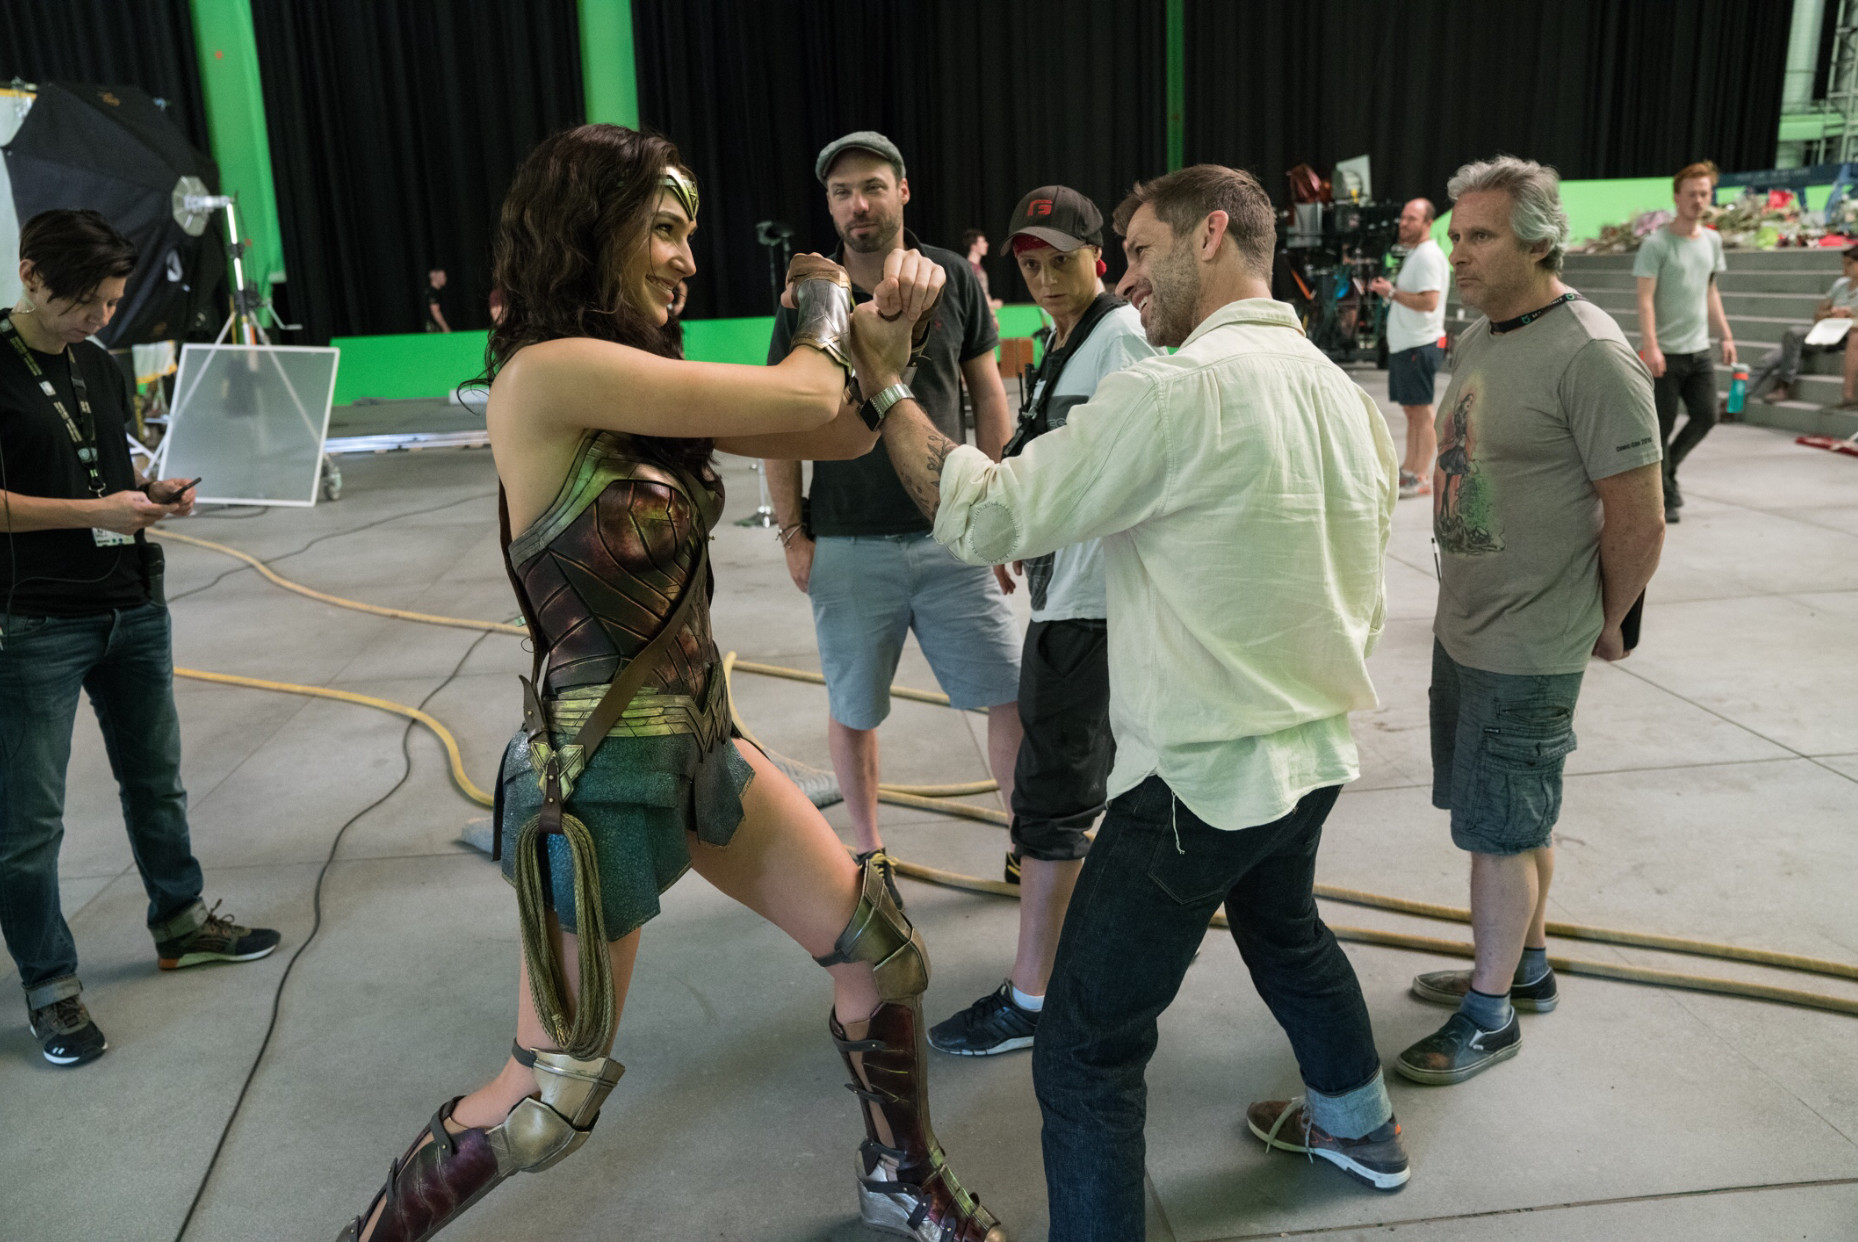 Justice League Zack Snyder and Gal Gadot